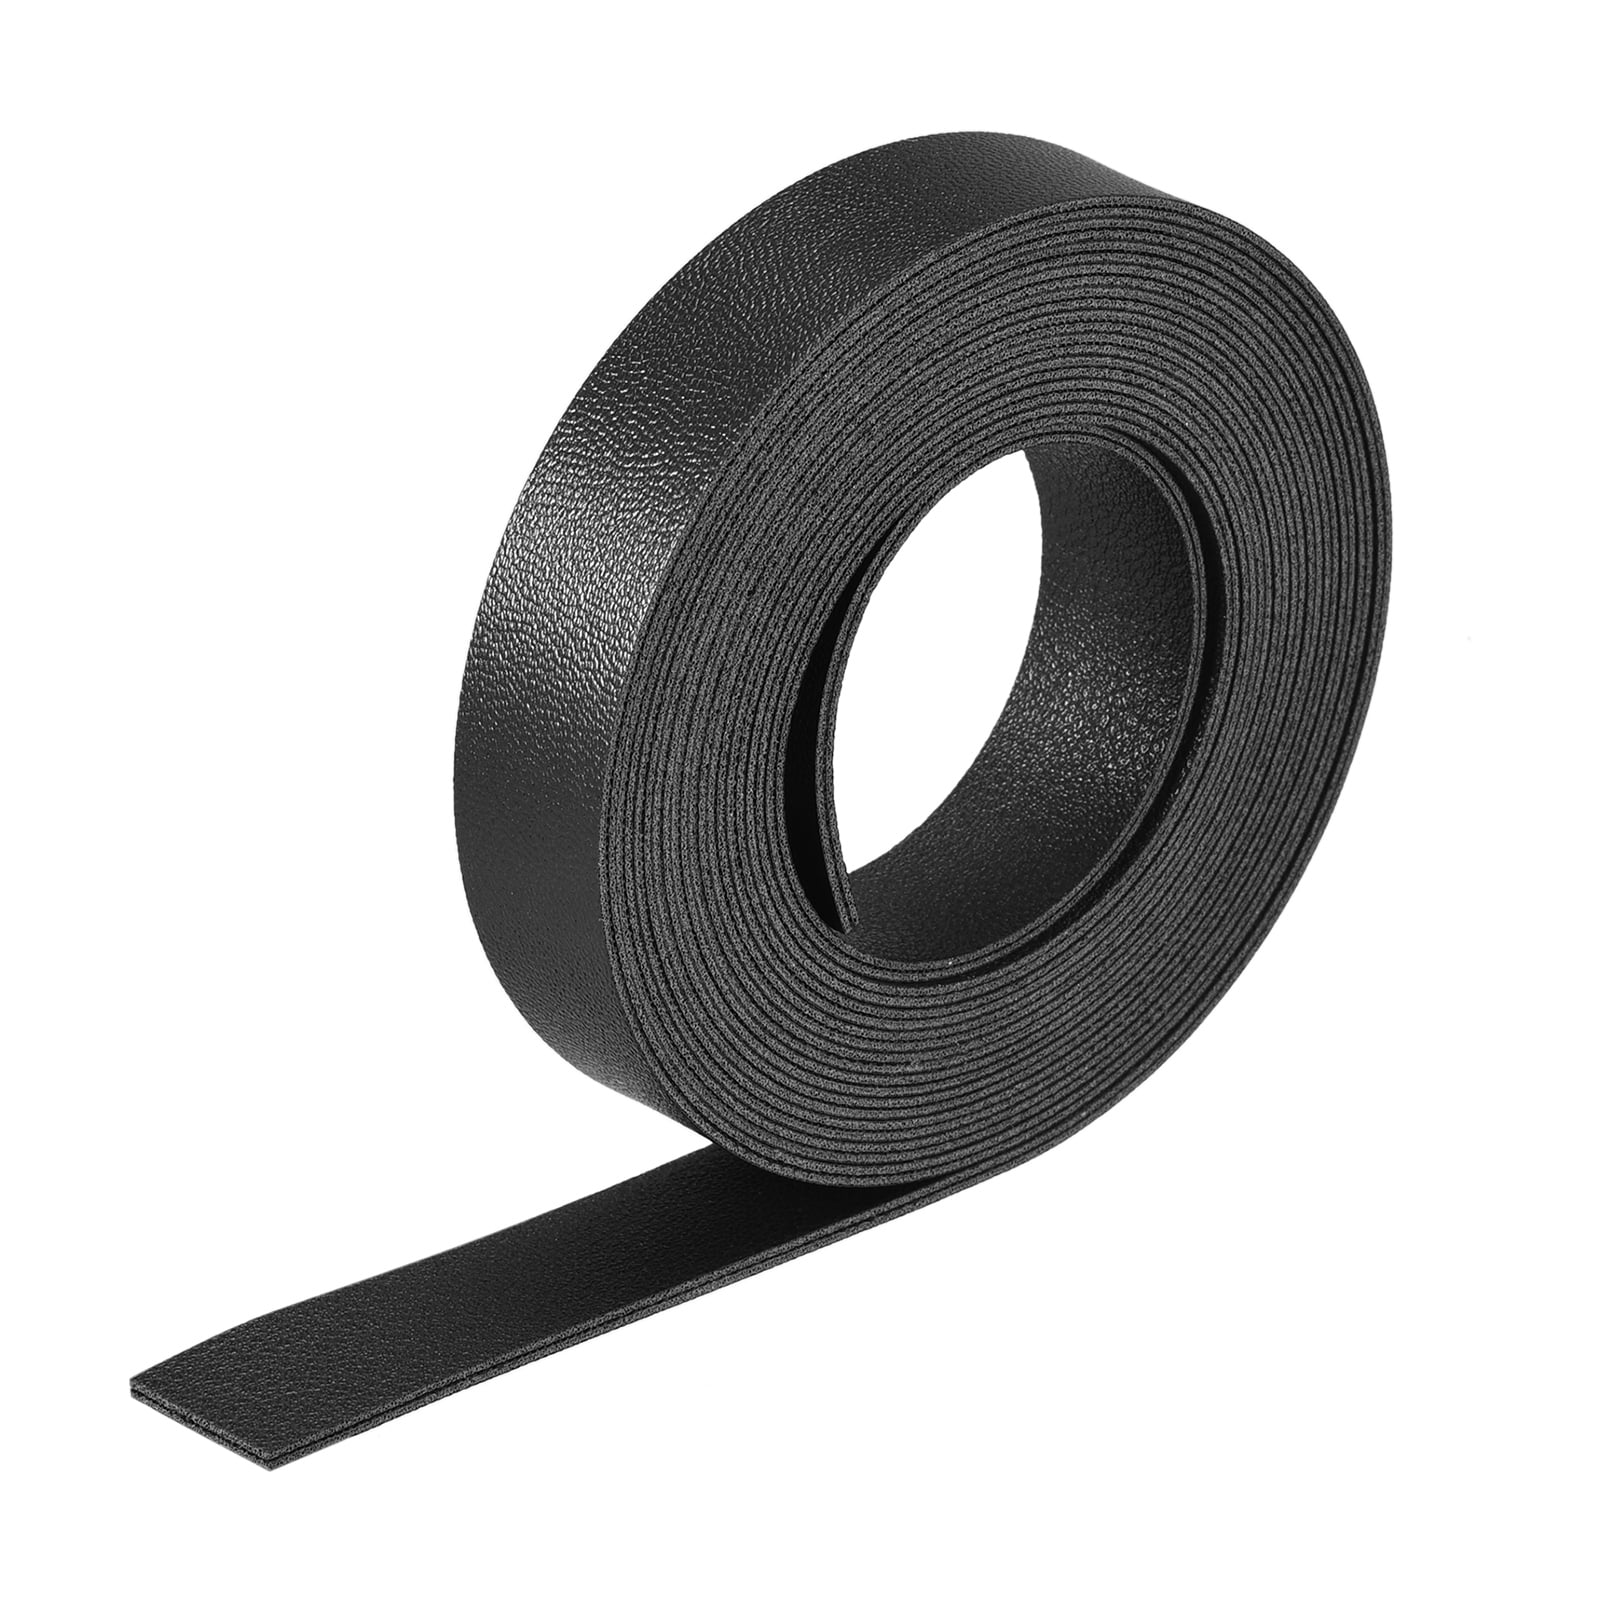 Heavy Duty Double-Sided Tape for Fabric - Anti-Skid Carpet Tape